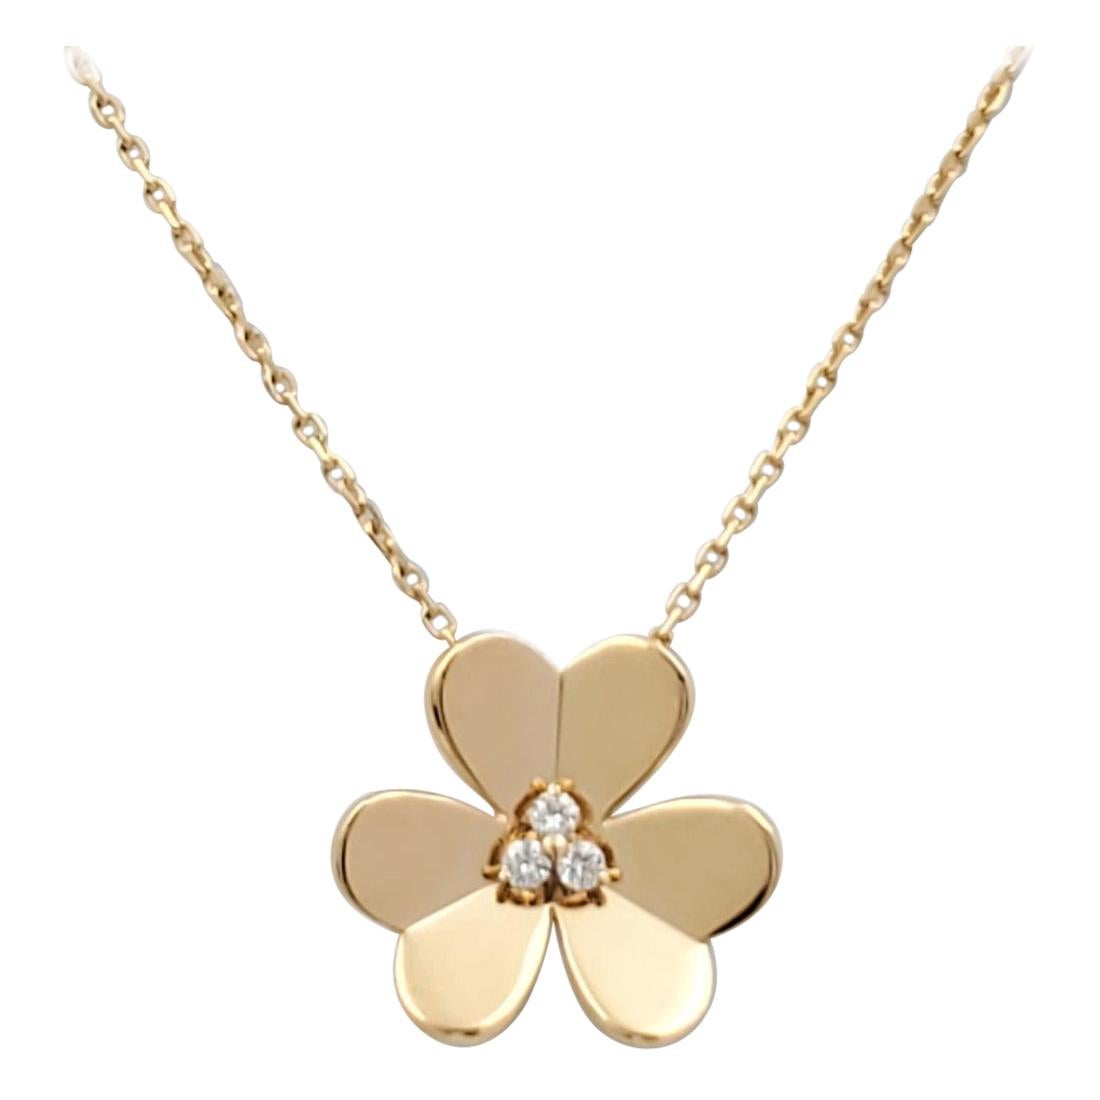 Van Cleef & Arpels 'Frivole' Yellow Gold and Diamond Necklace, Large Model